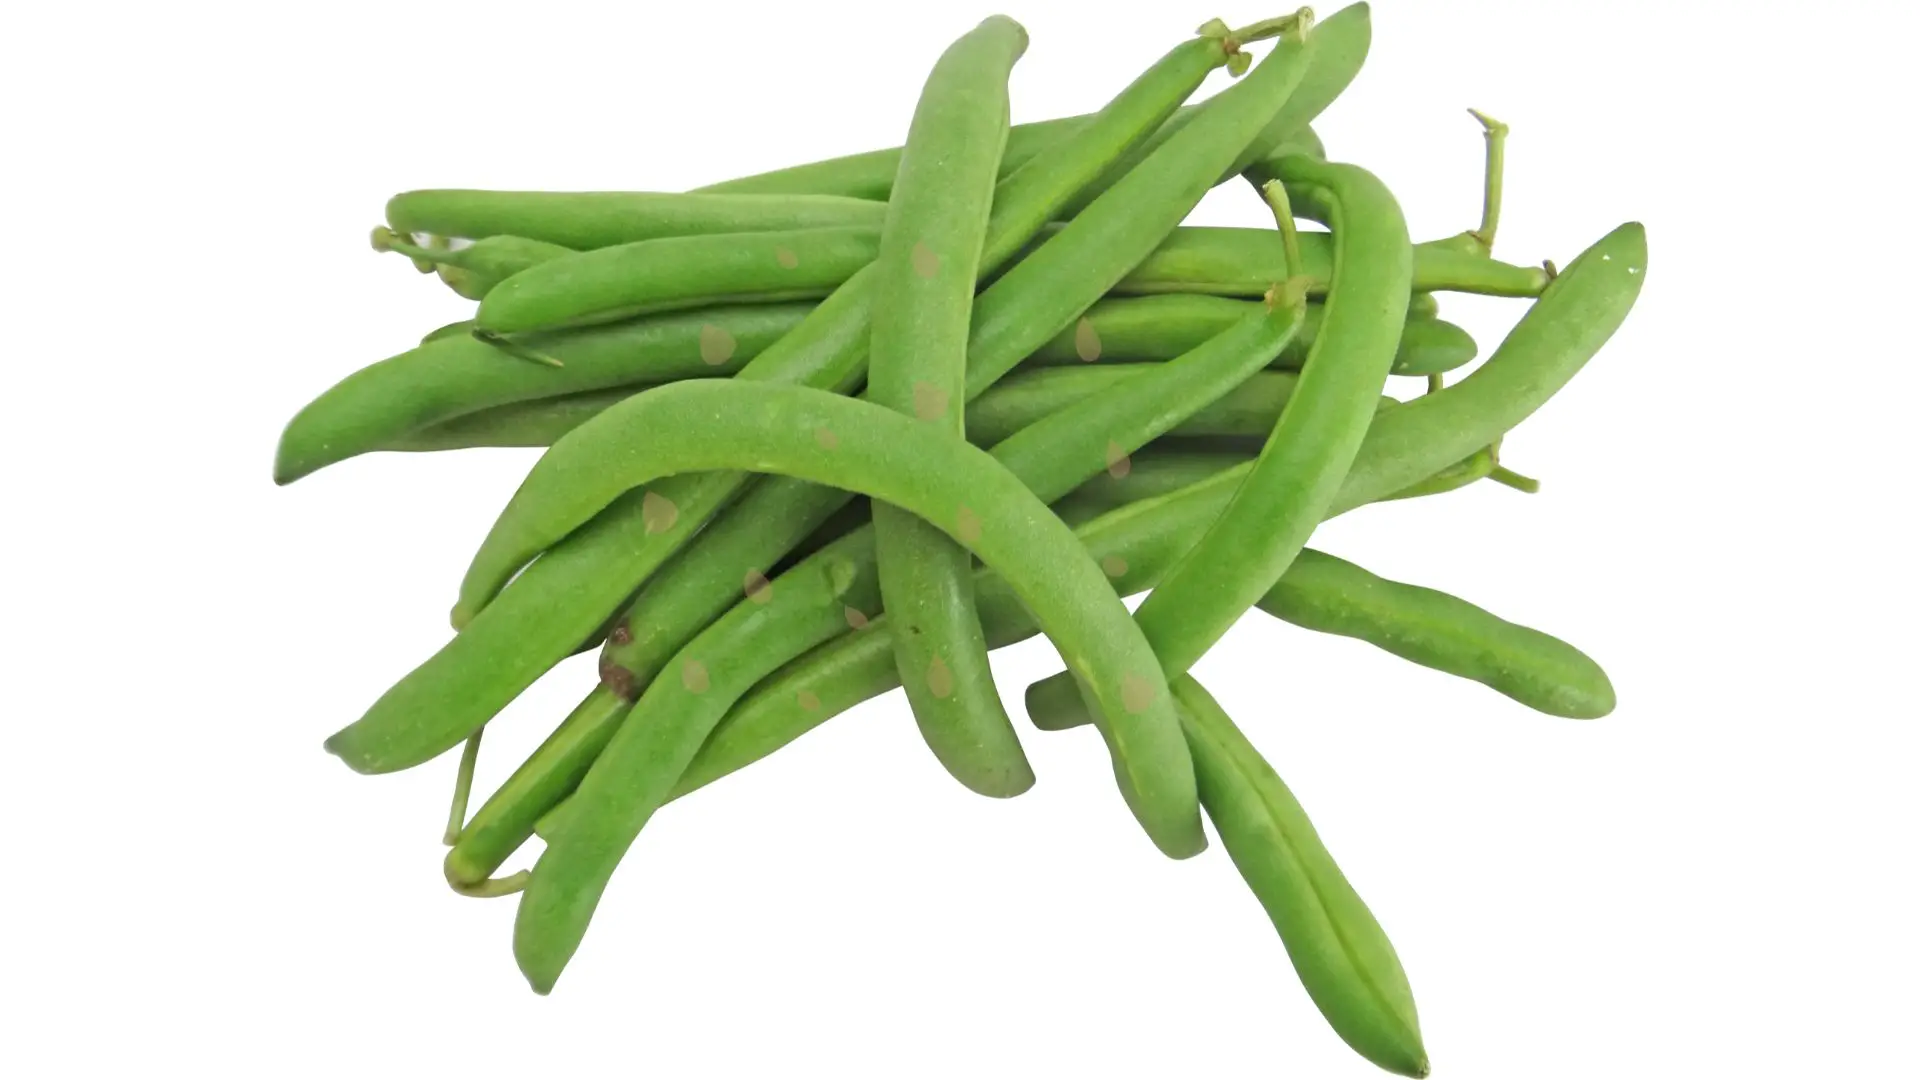 green beans are slimy